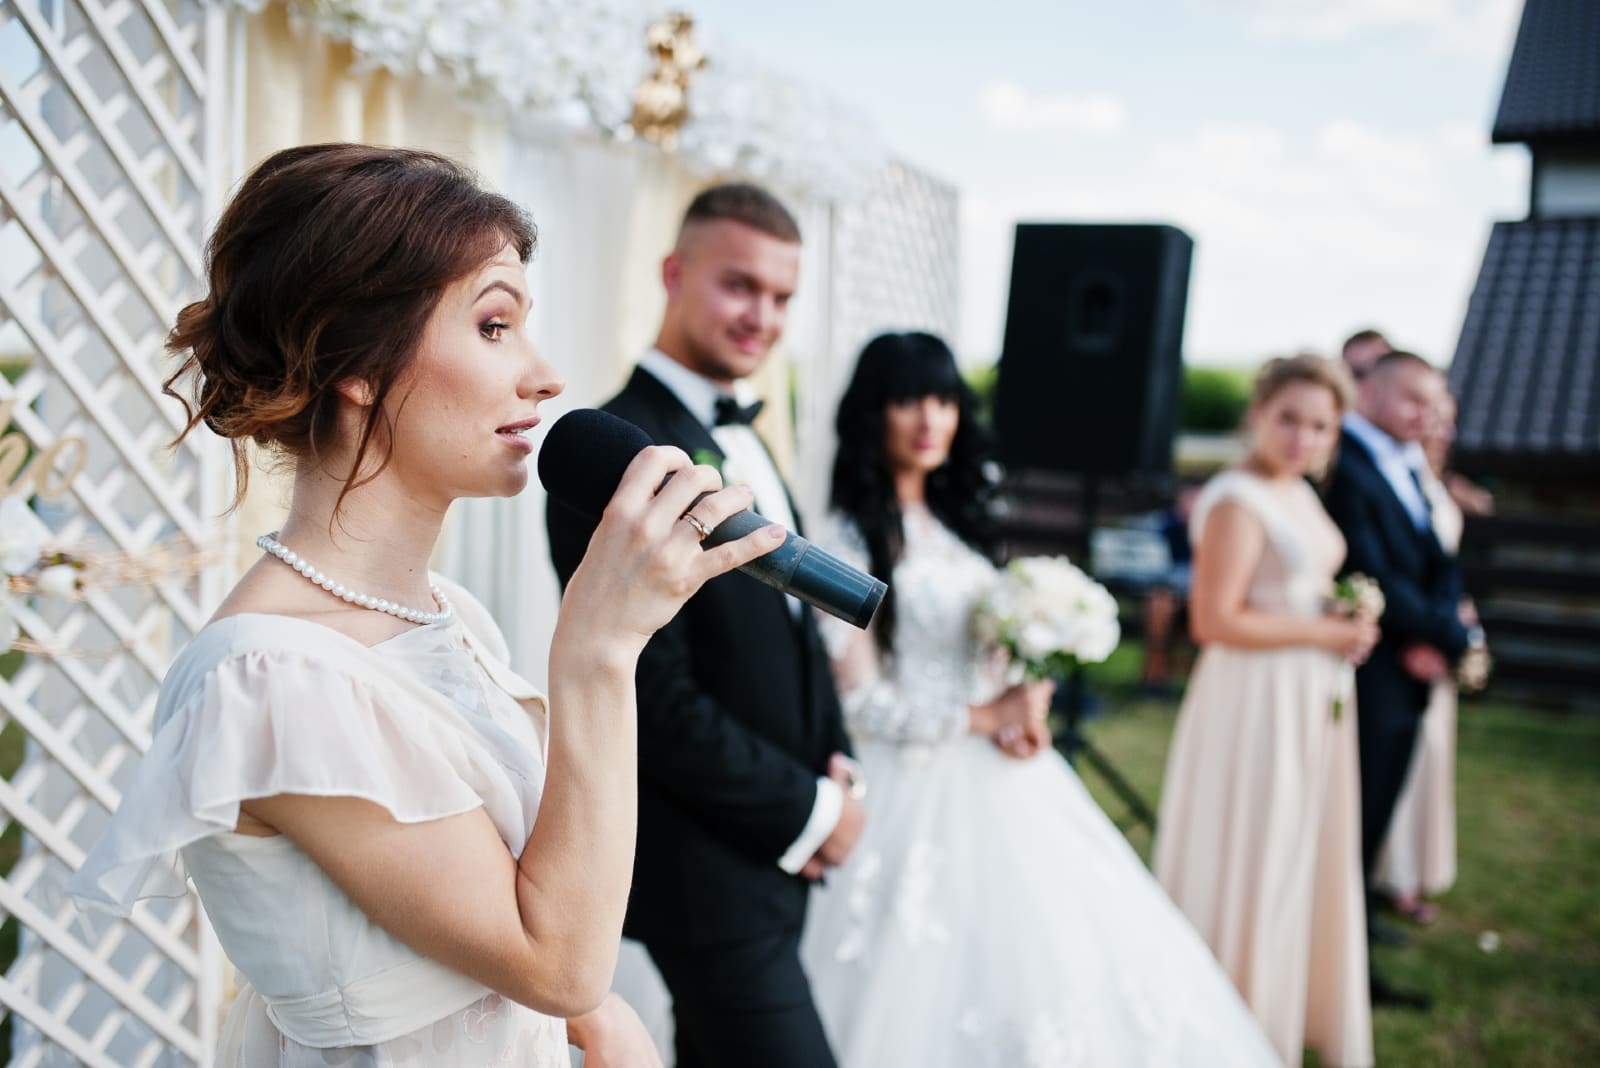 10 Best Maid Of Honor Speech Examples 15 Pro Tips